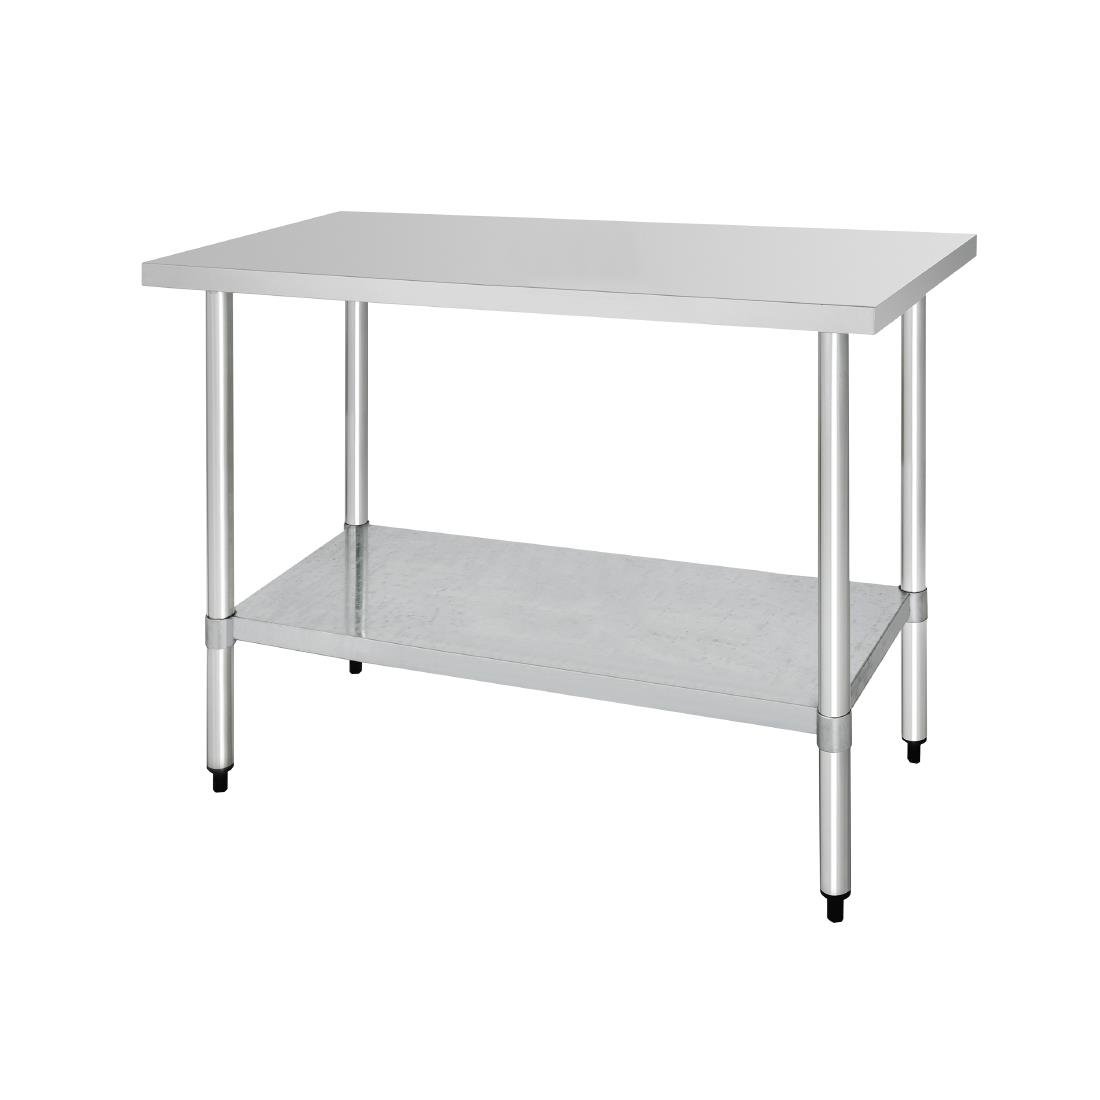 Vogue Stainless Steel Prep Table 1800mm (900(H) x 1800(W) x 700(D)mm)